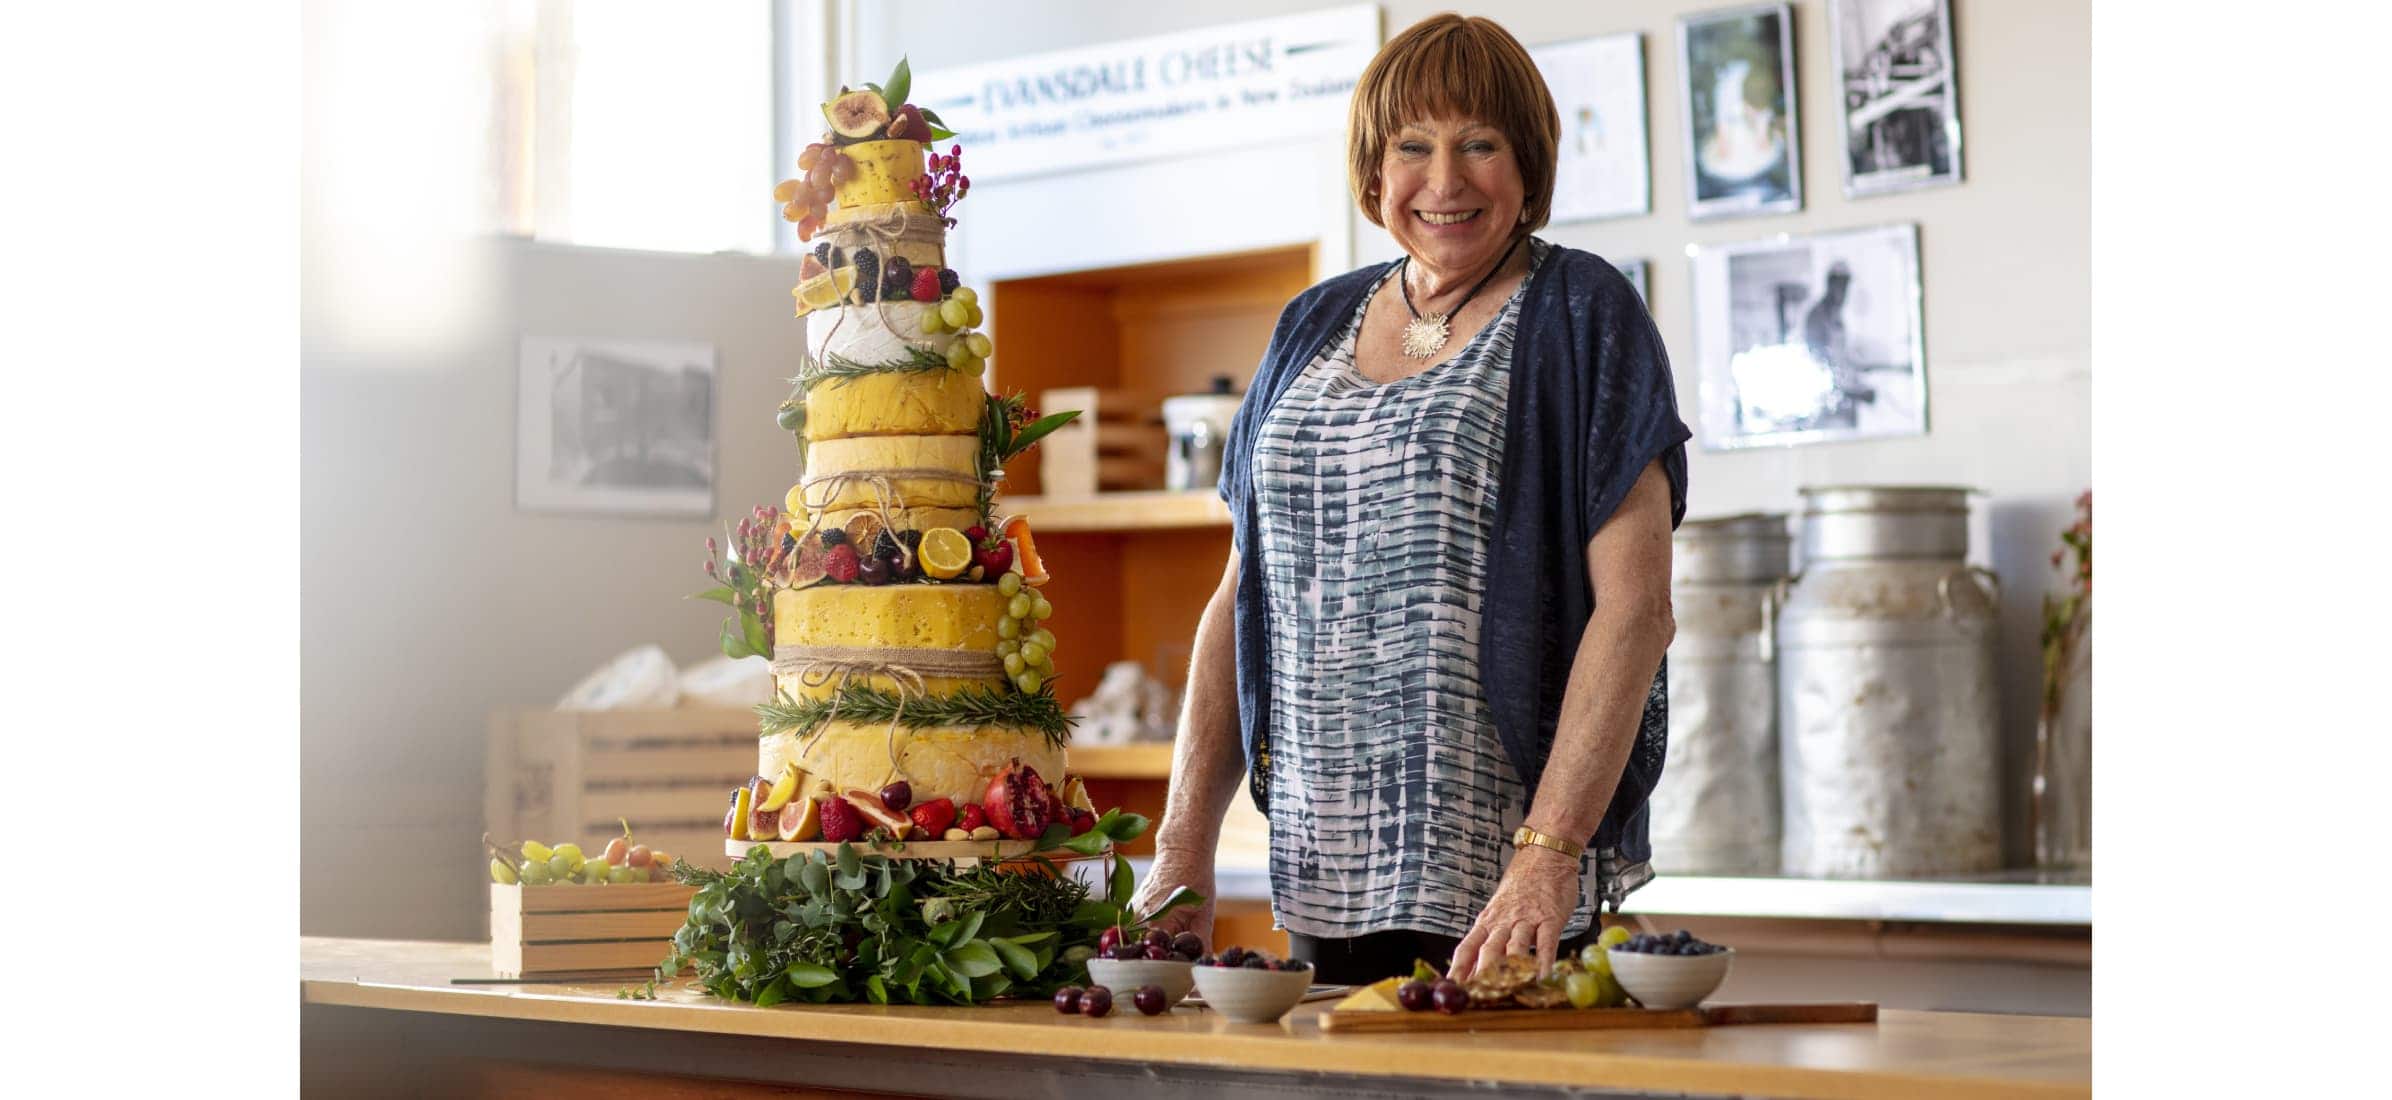 Colleen displays her example of a wedding cheese cake made by towering layers of circular cheese blocks.